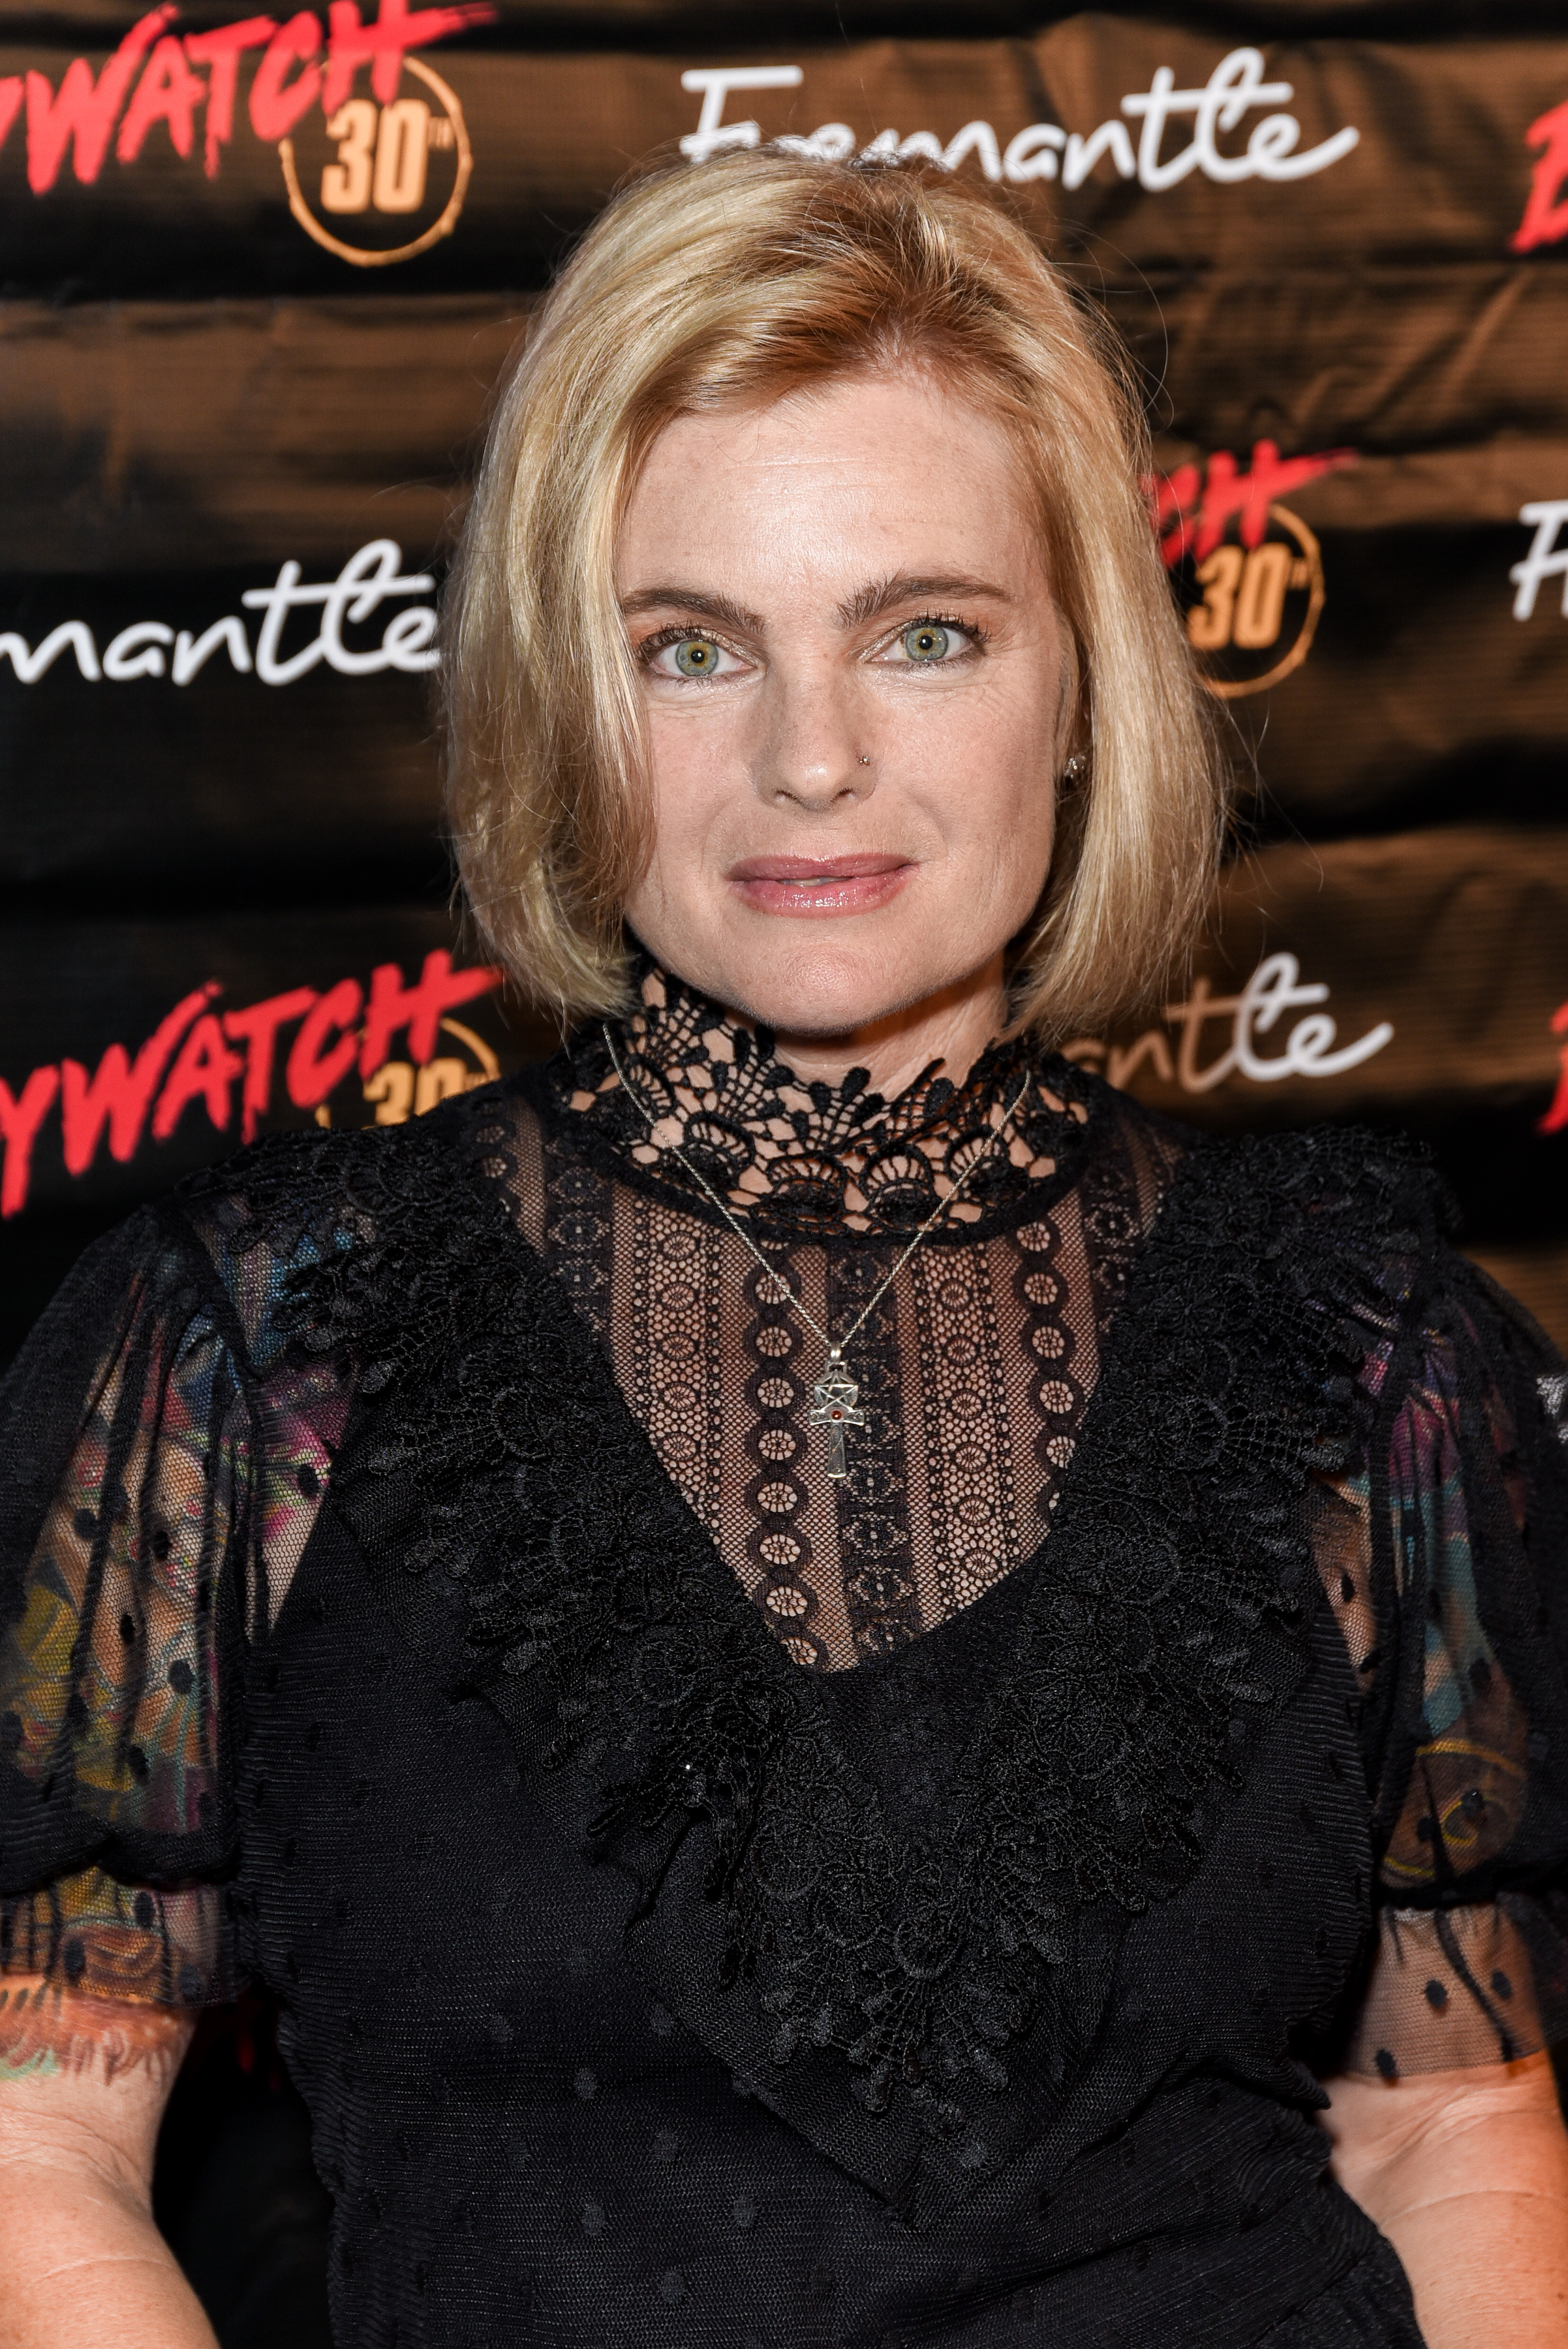 Erika Eleniak attends 30th Anniversary of "Baywatch" at the Viceroy Hotel on September 24, 2019, in Santa Monica, California. | Source: Getty Images